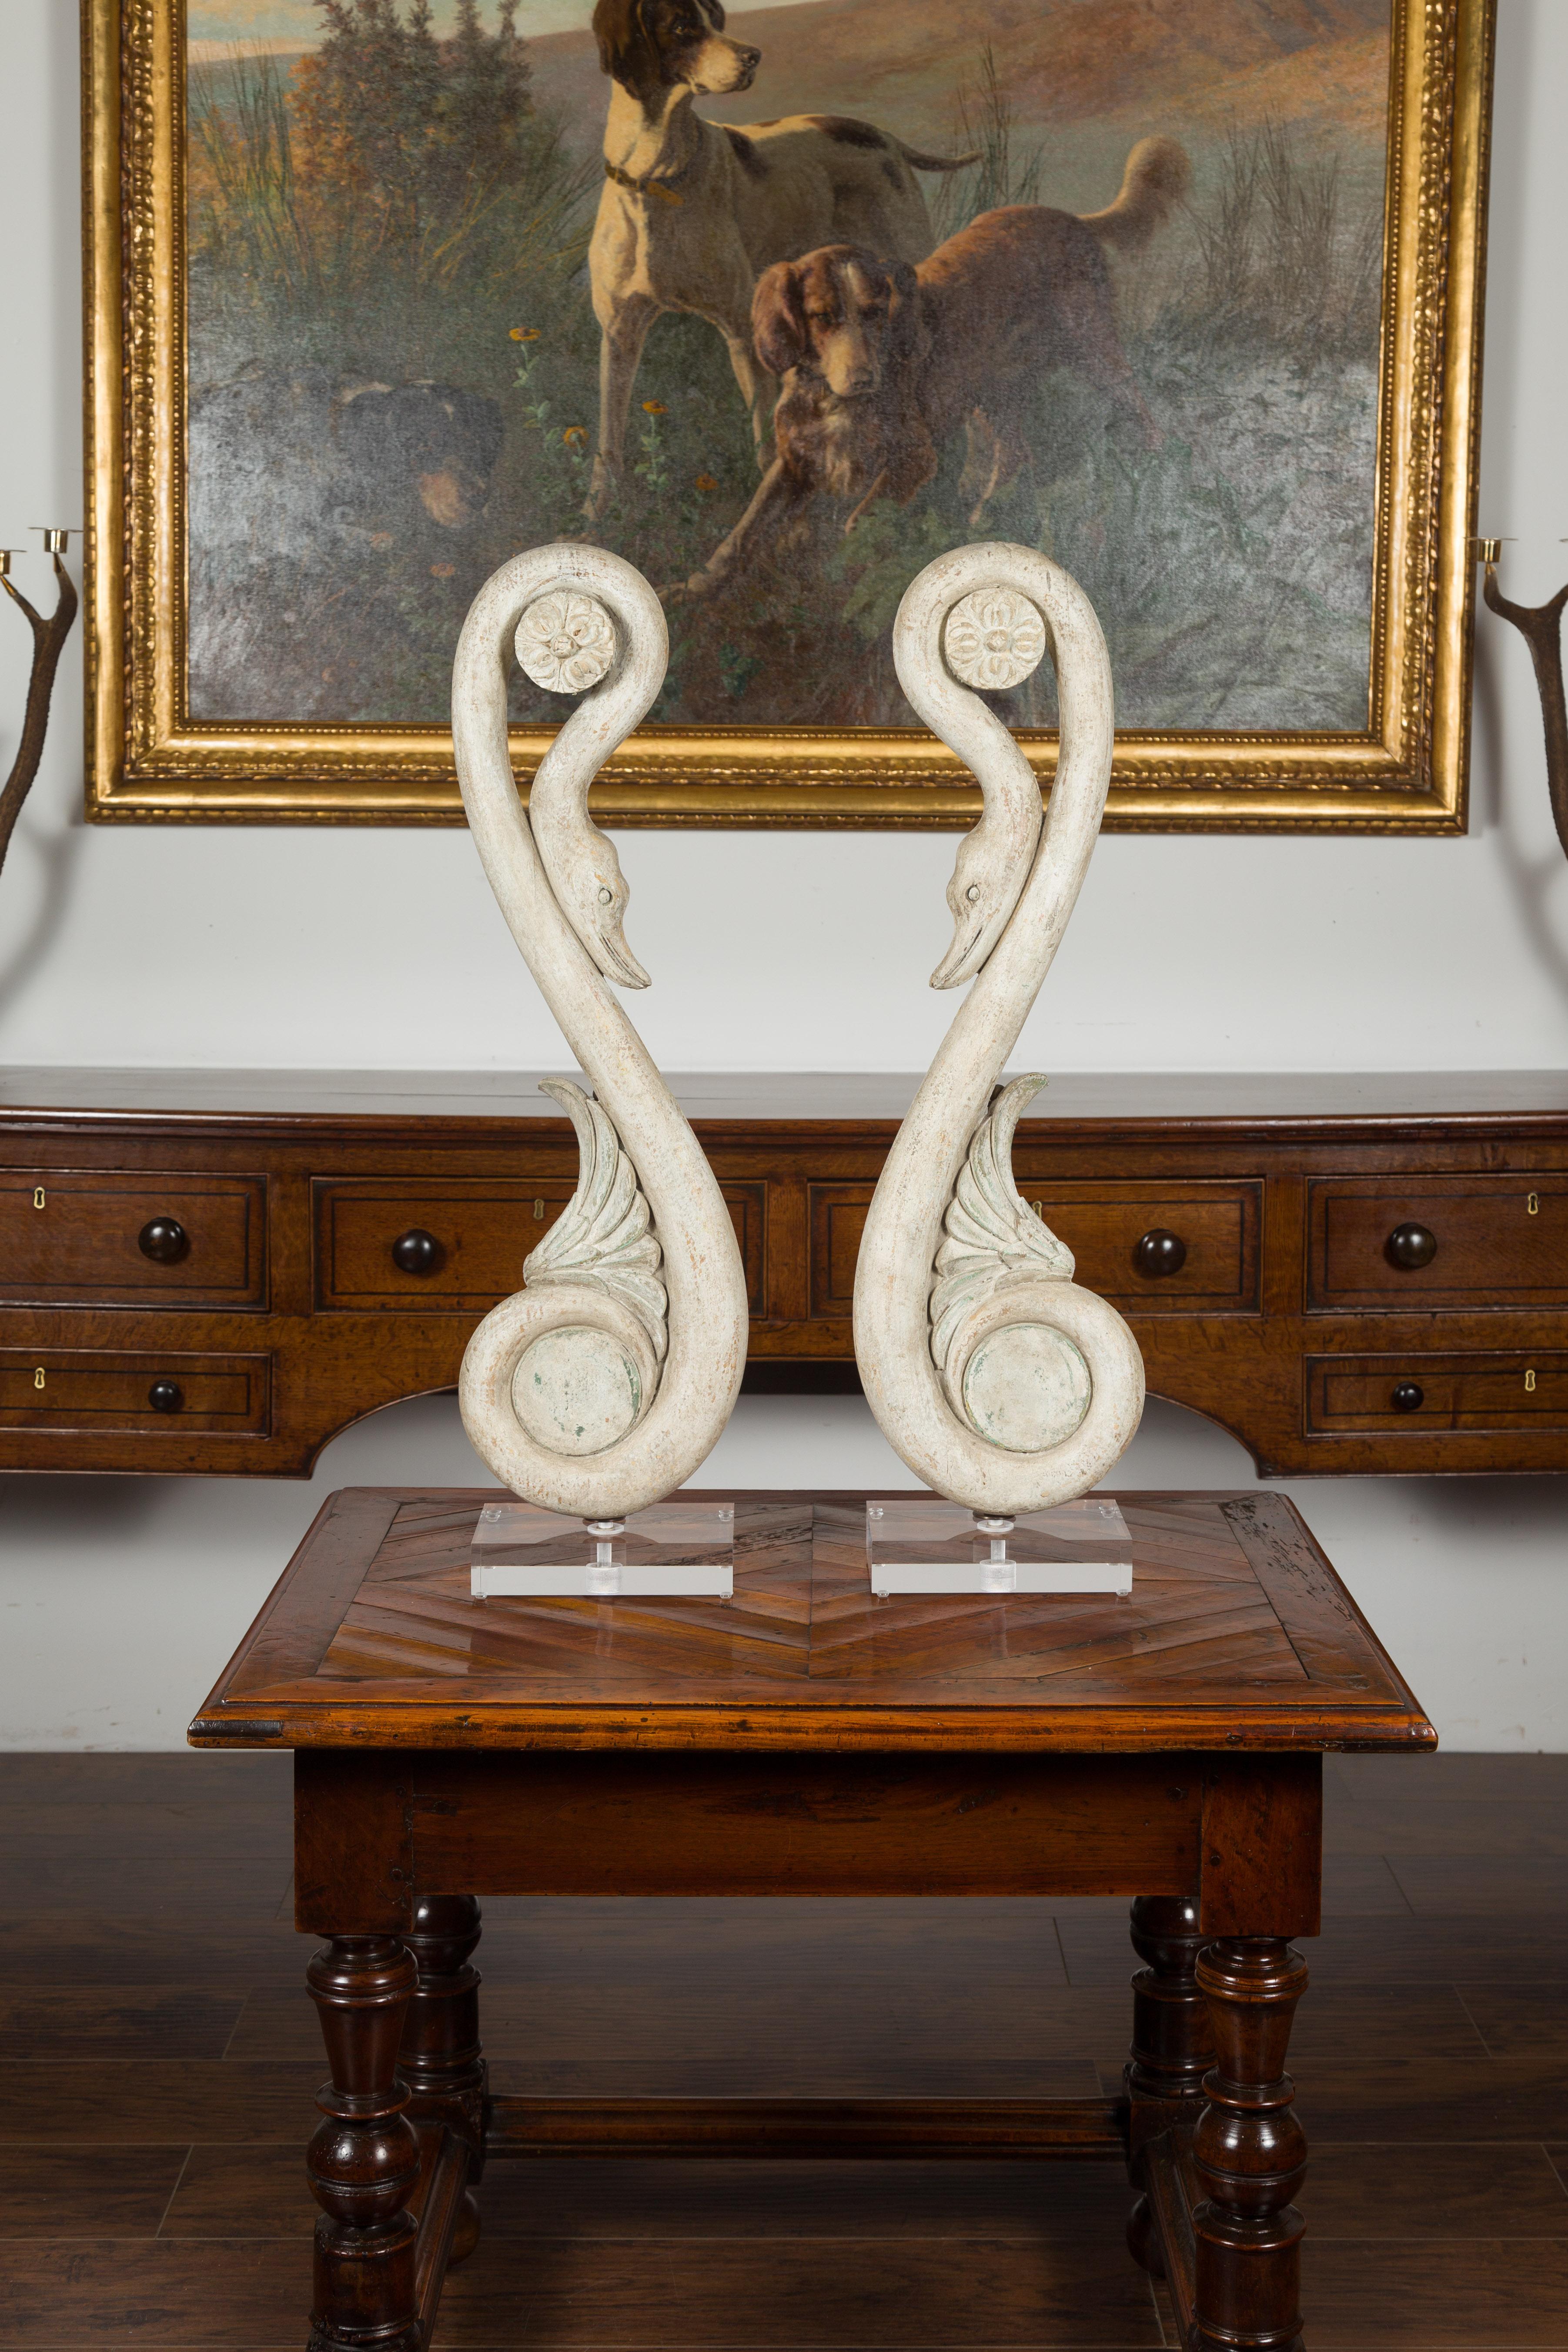 A pair of carved Italian swan fragments from the 19th century, mounted on custom Lucite bases. We have two pairs available, priced and sold $3,995 each pair. Created in Italy during the 19th century, each of this pair of carved fragments features a